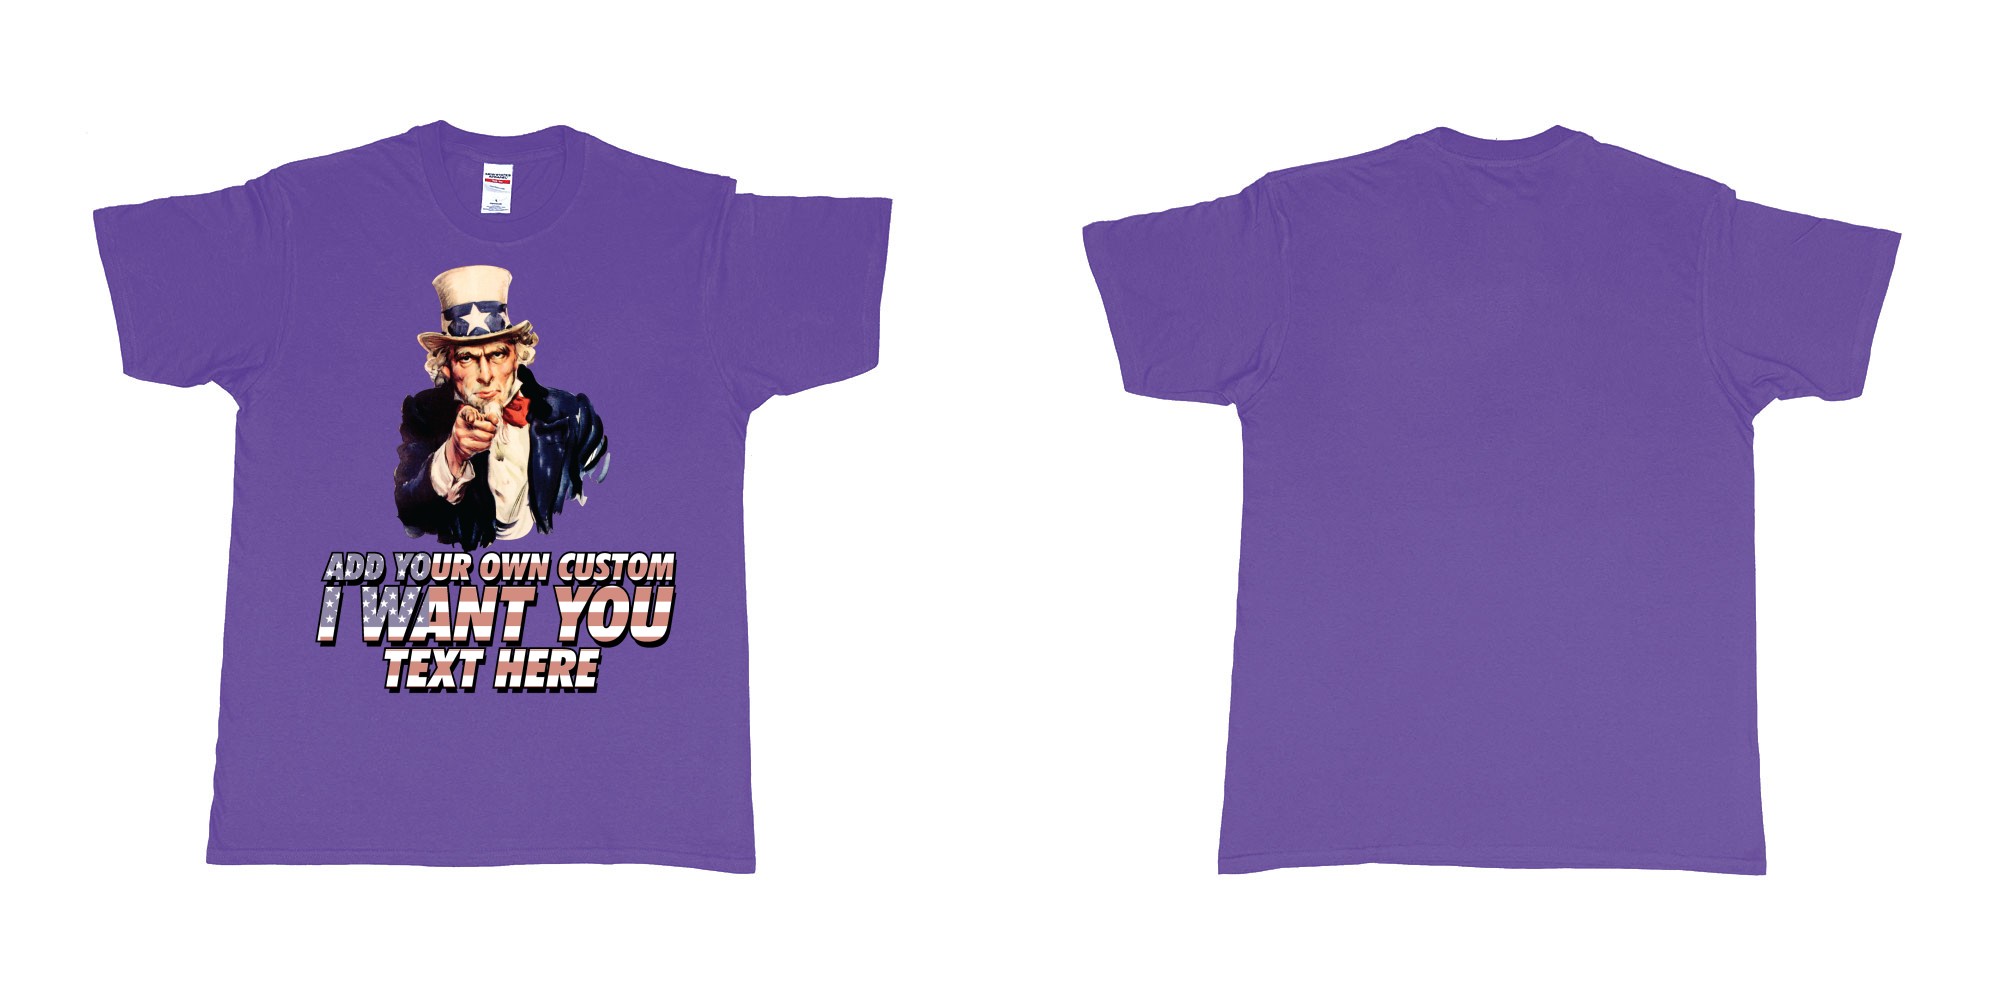 Custom tshirt design uncle sam i want you custom design own printing in fabric color purple choice your own text made in Bali by The Pirate Way